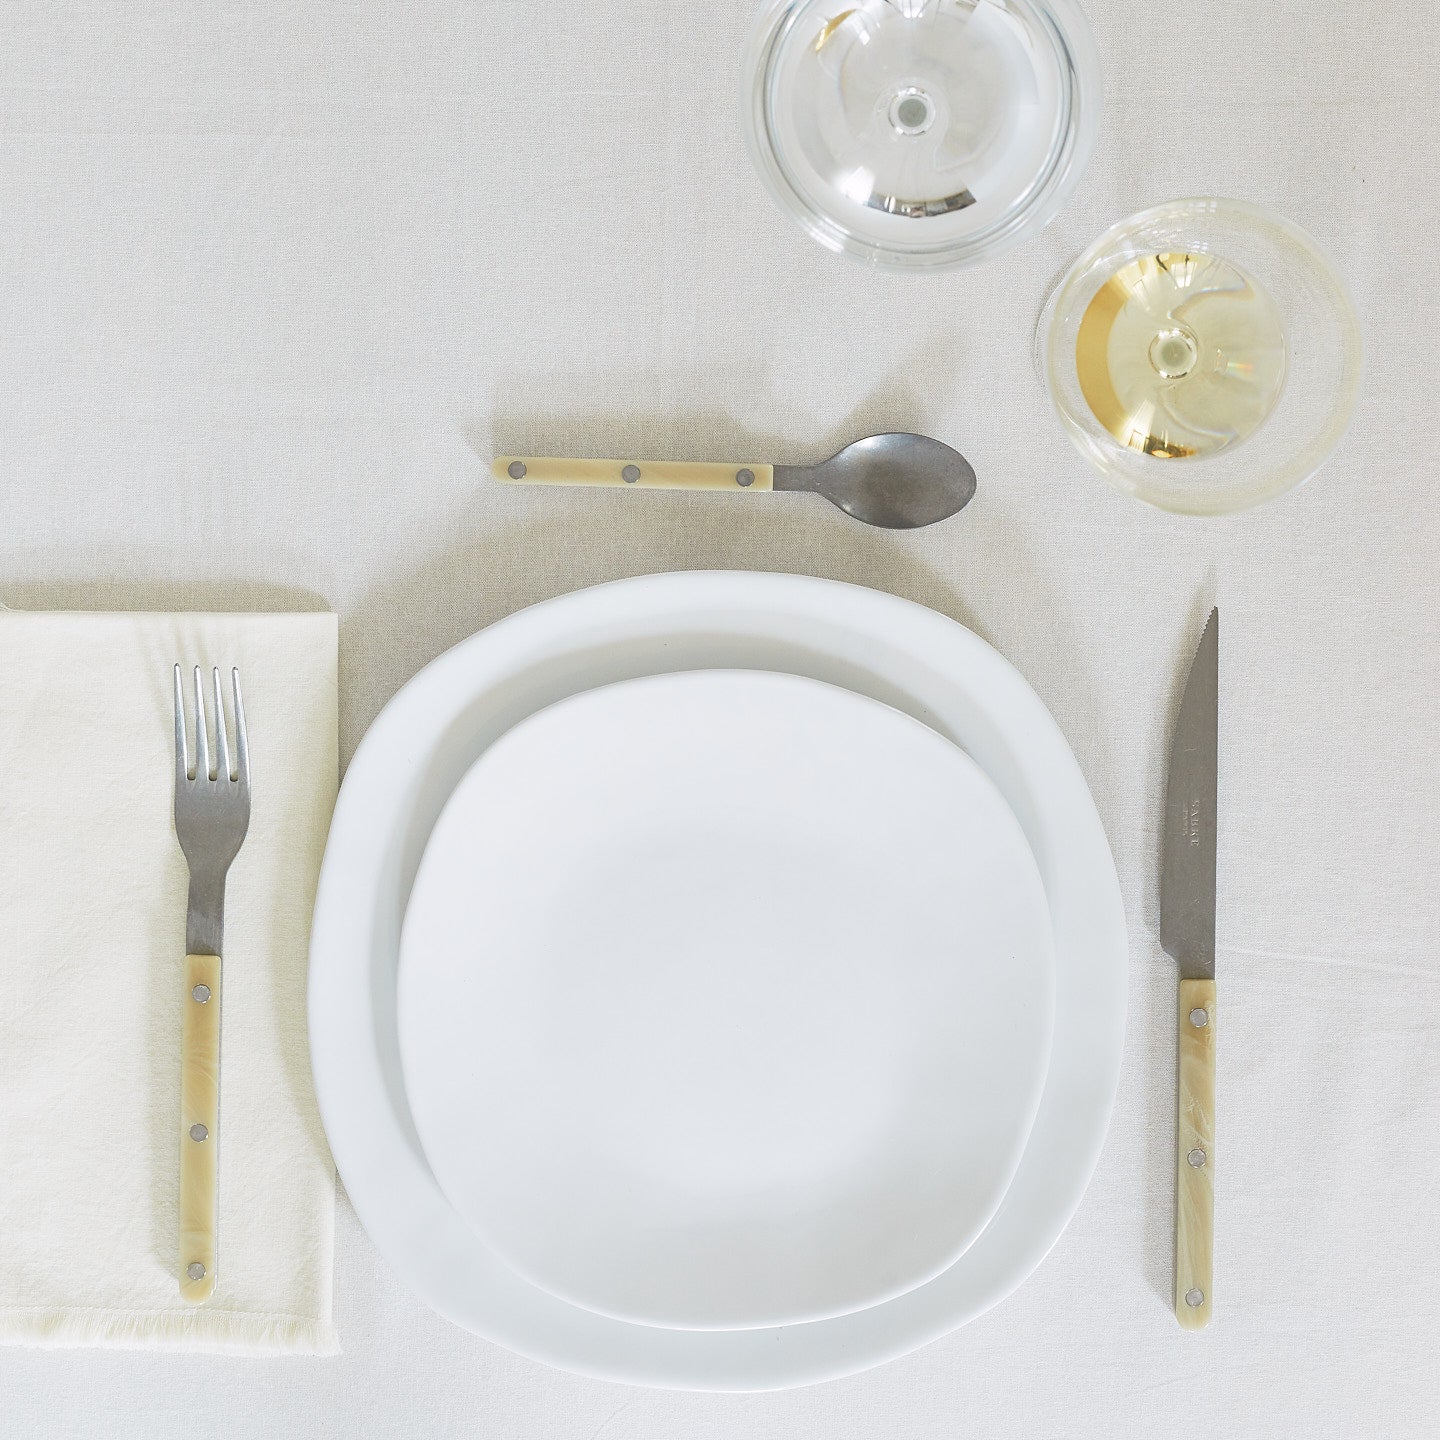 Placesetting of white Strata dinnerware on pink striped tablecloth.